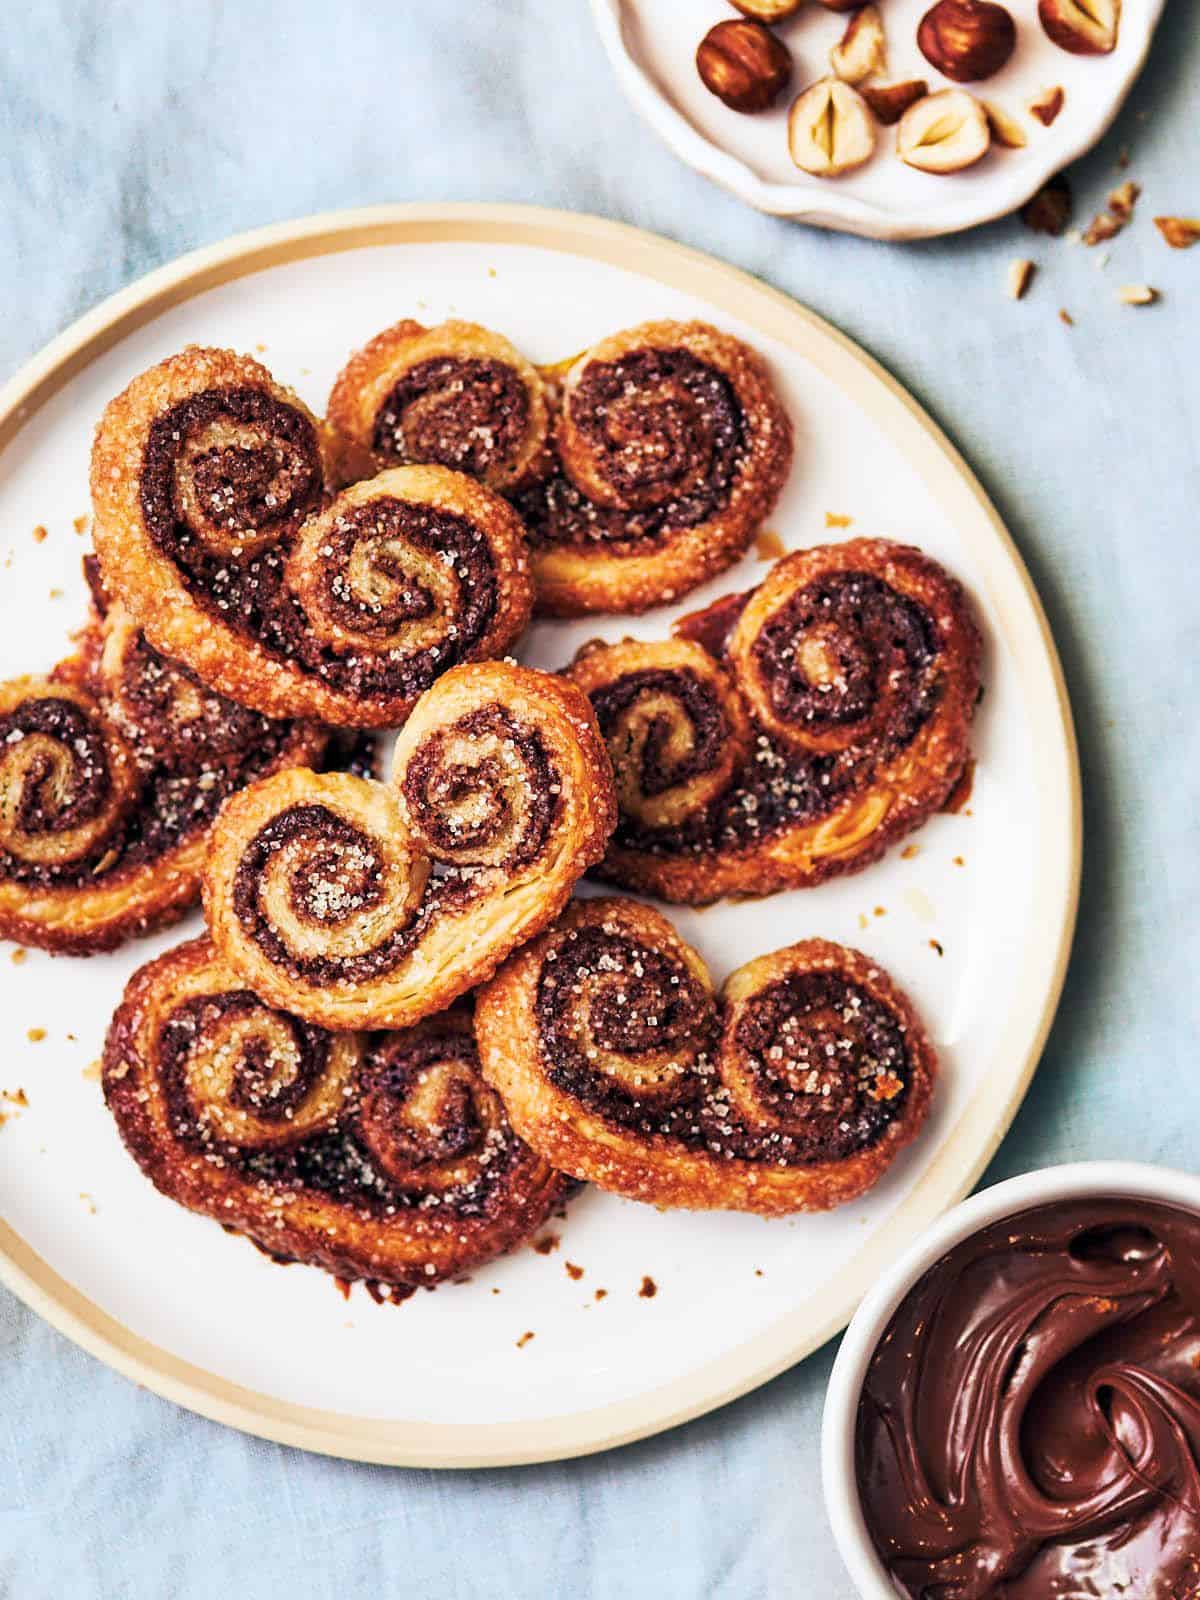 Nutella puff pastry palmiers featuring a buttery puff pastry with chocolate hazelnut swirl.